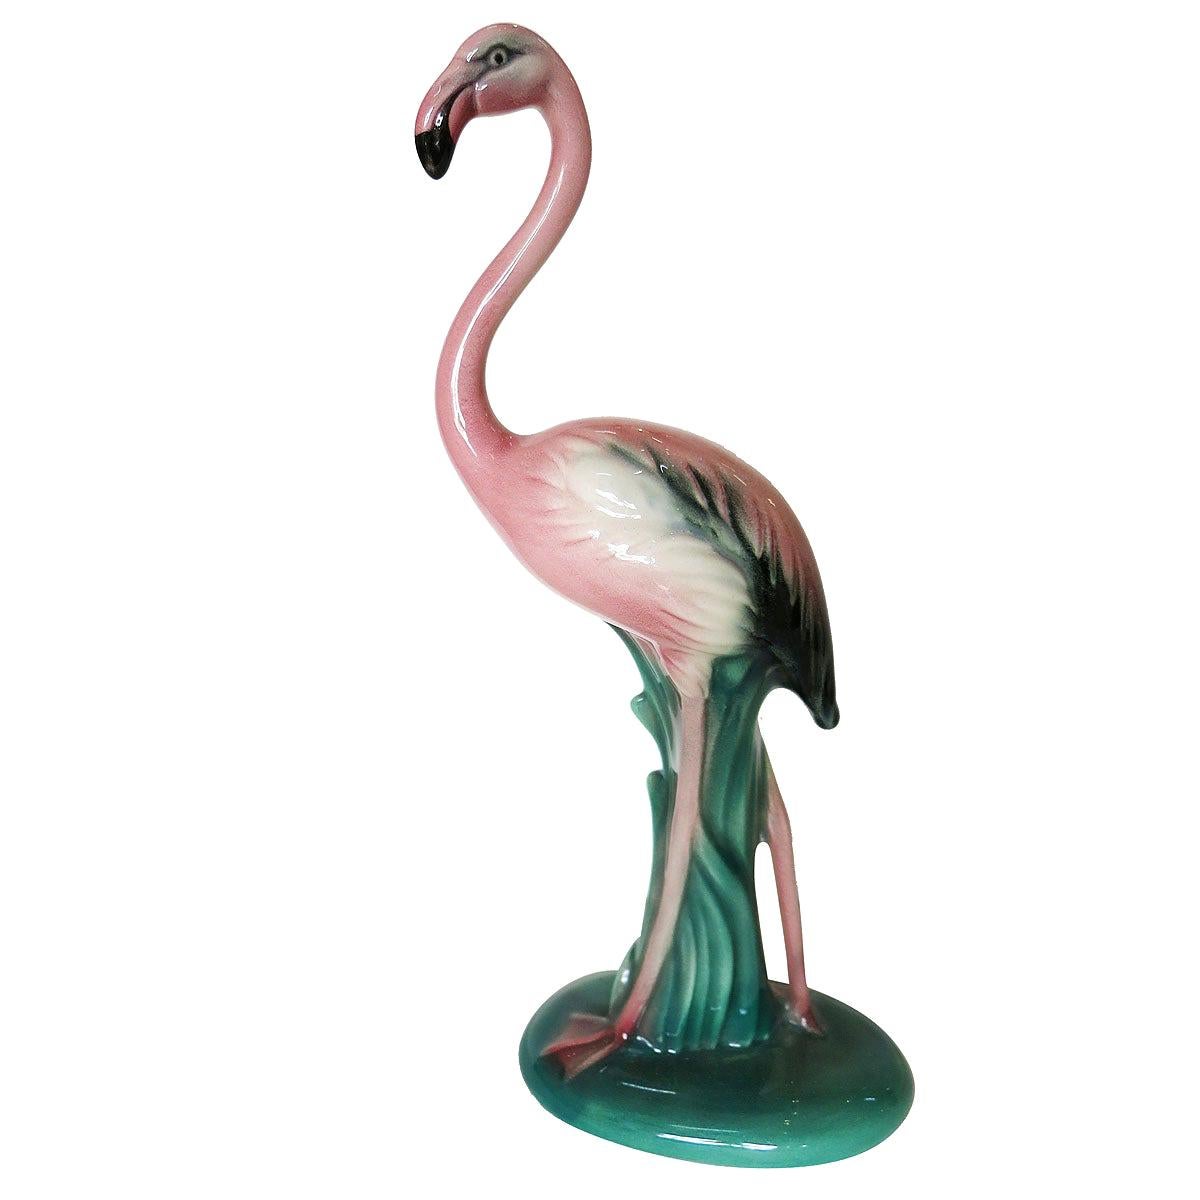 California Pottery Flamingo Statue by Will-George